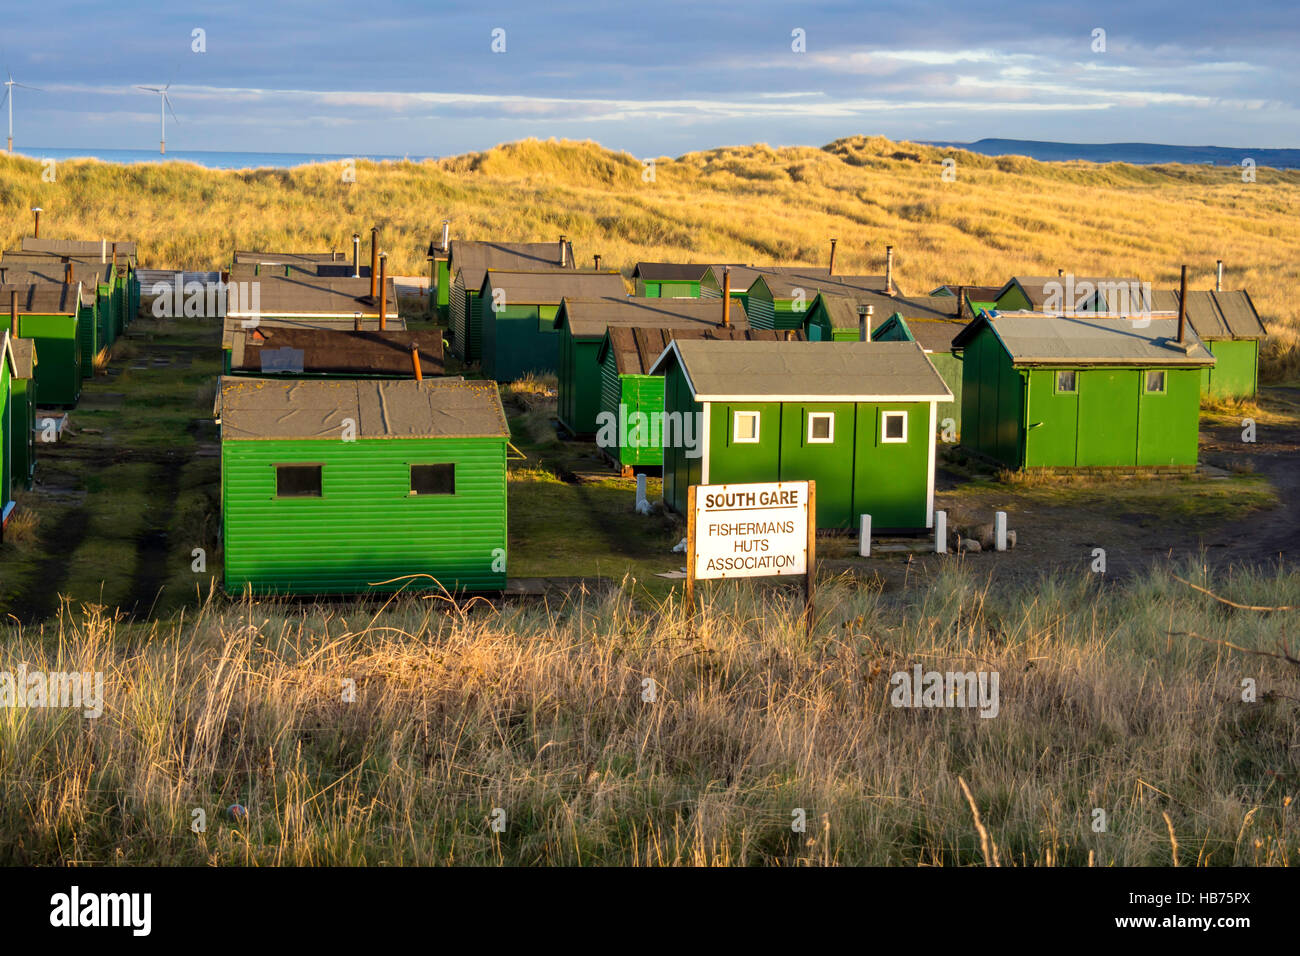 Green fisherman's huts at the South Gare Teesmouth, England UK with Sign South Gare Fishermans Huts Association Stock Photo